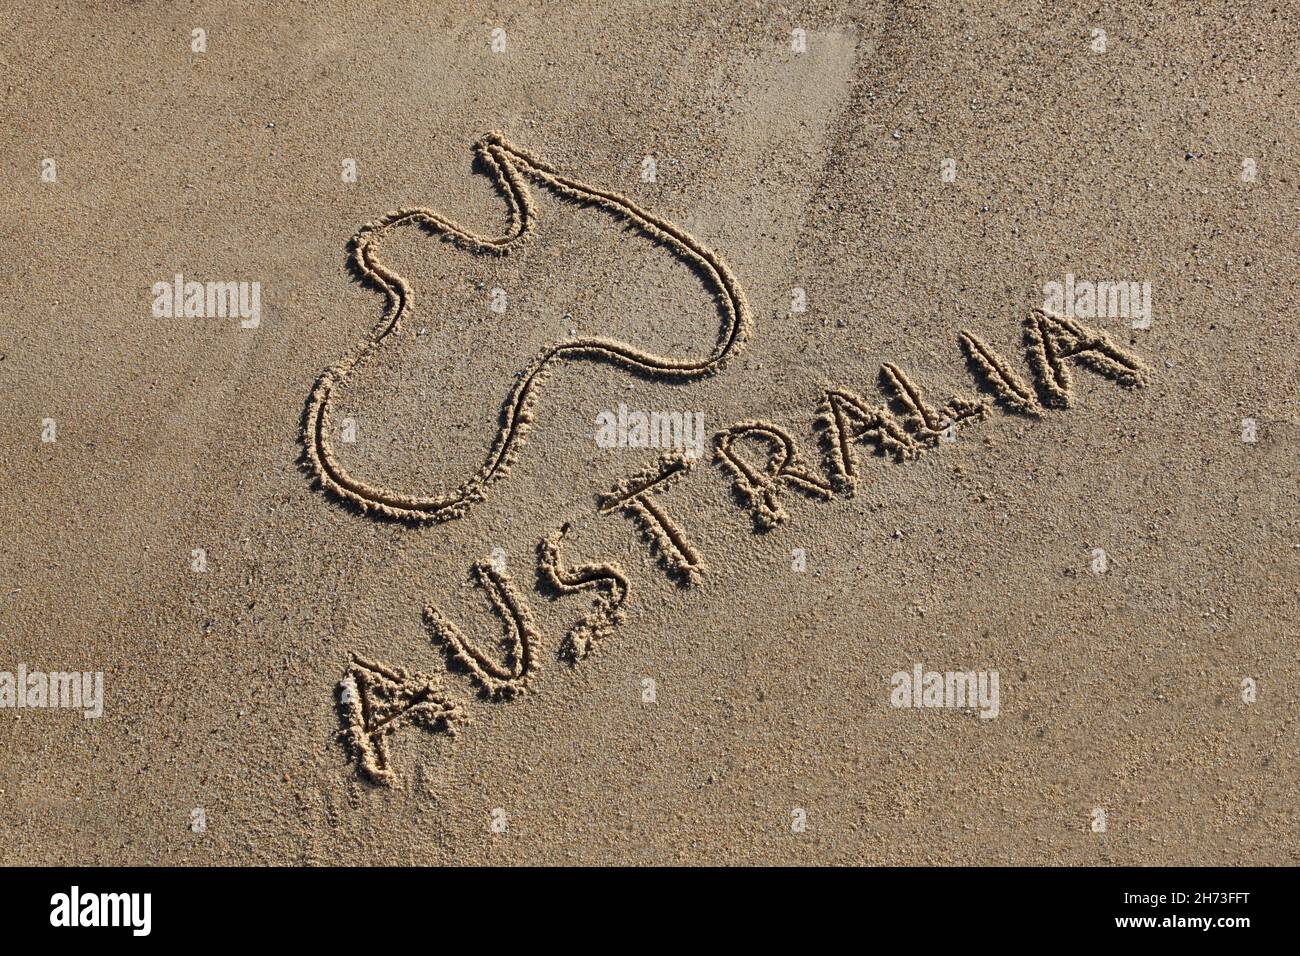 Australia Map and word drawn in the sand at the beach on an angle.  Australia's beaches are one of its iconic drawcards. Stock Photo